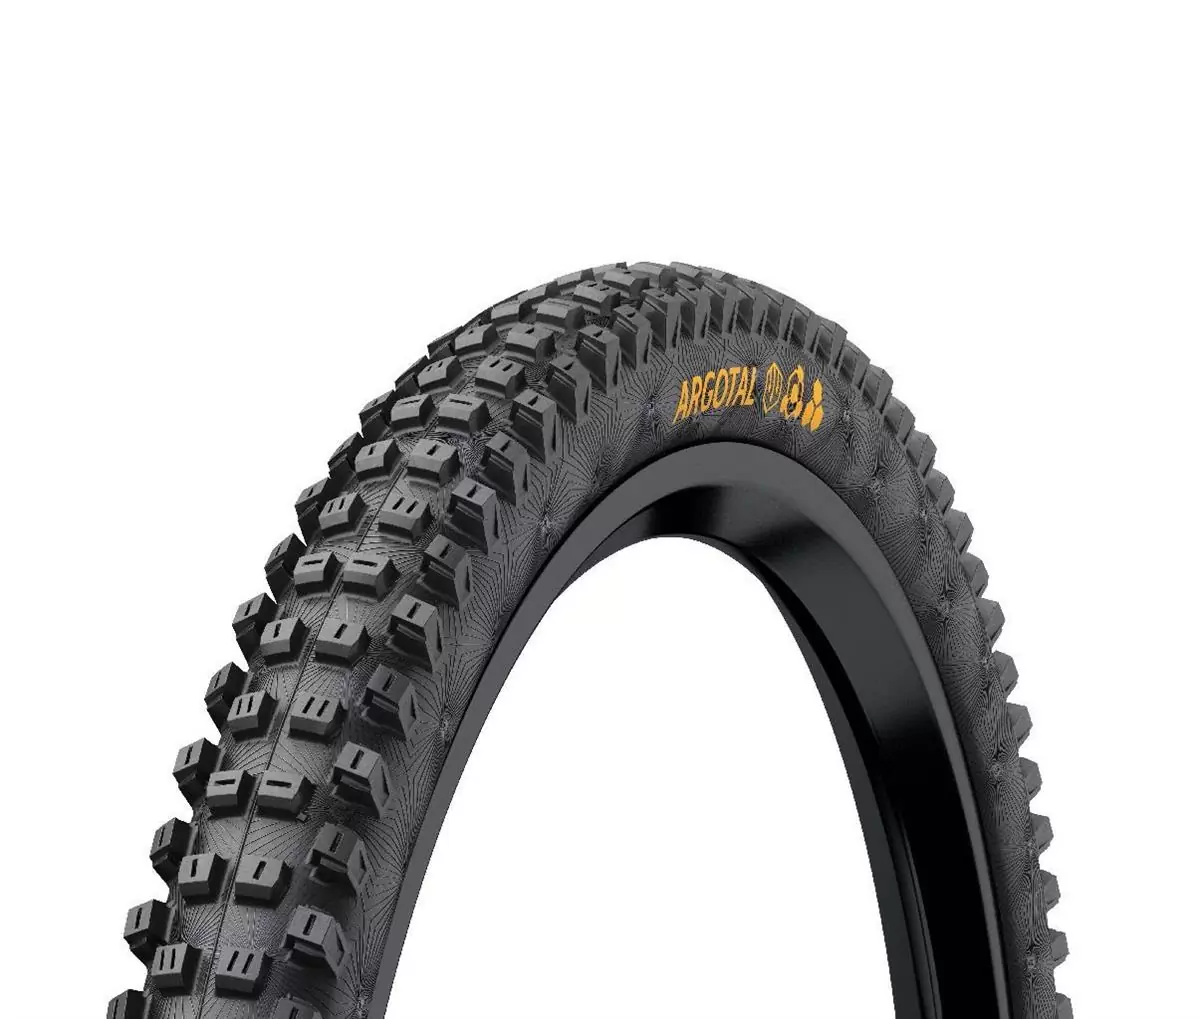 Argotal 29x2.40 Soft-Compound/Downhill Casing Folding Tubeless Ready Tire - image